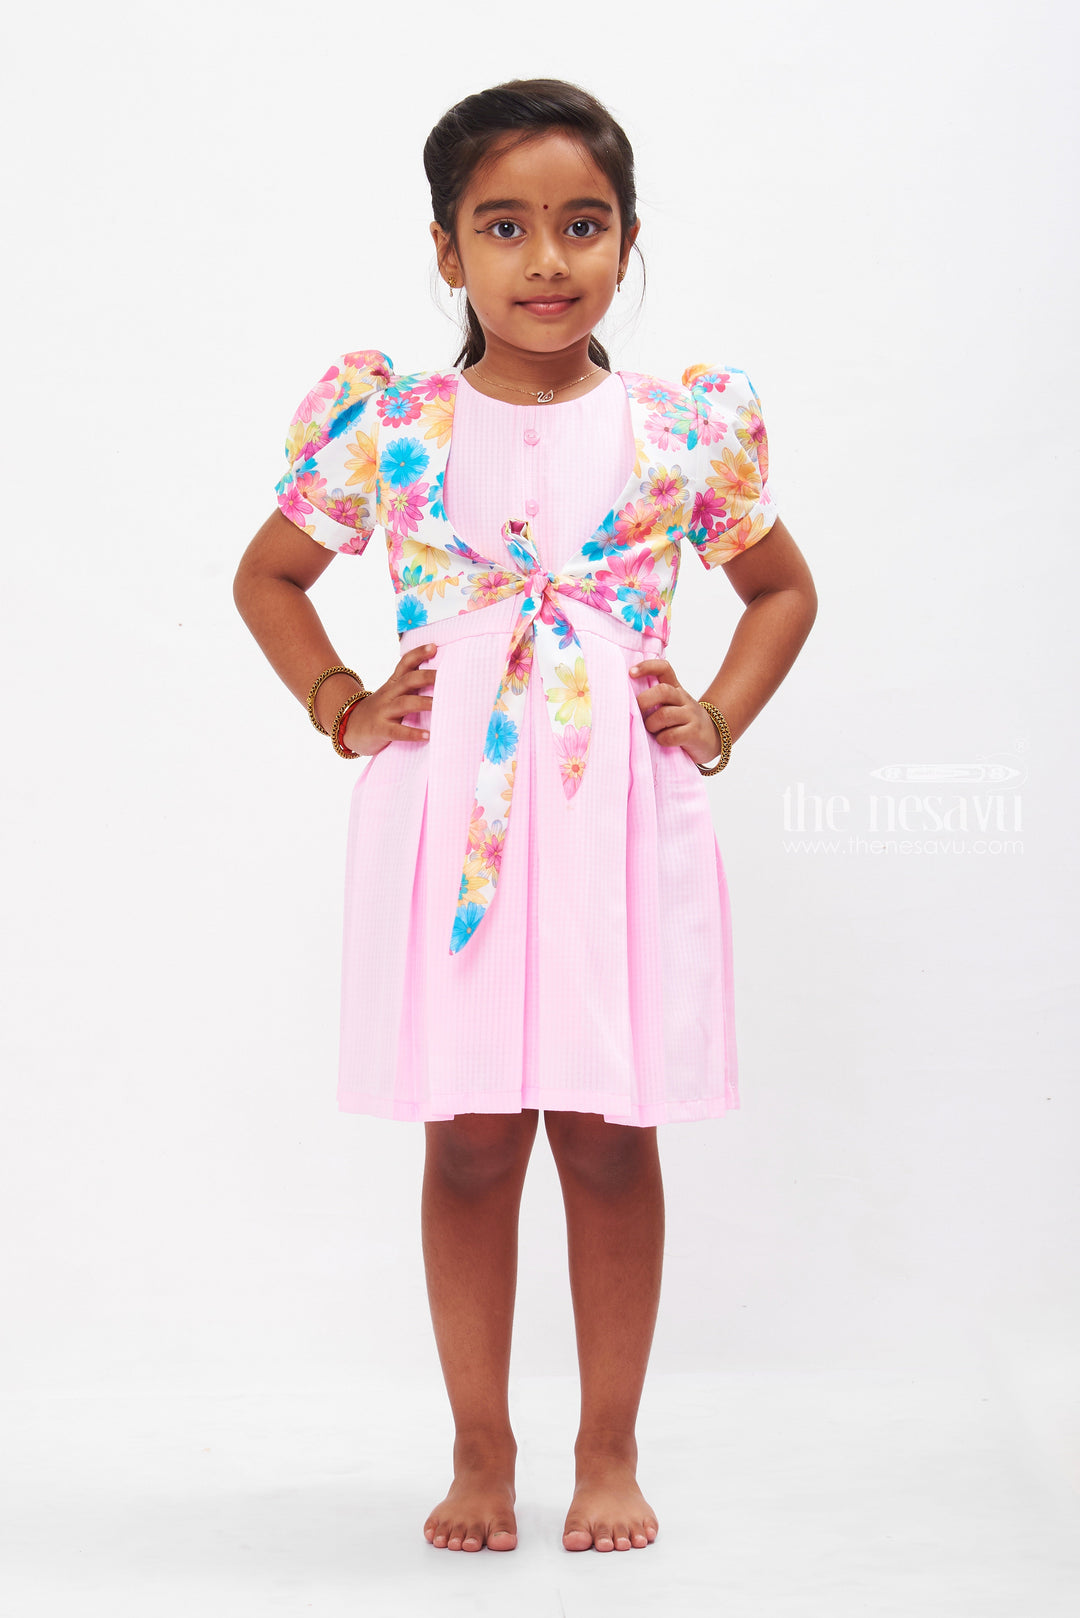 The Nesavu Girls Cotton Frock Blossom-Adorned Pink Checkered Cotton Frock with Jacket for Girls Nesavu 22 (4Y) / Pink / Cotton GFC1259A-22 Girls Pink Checkered Dress & Floral Jacket Set | Spring Cotton Outfit | The Nesavu